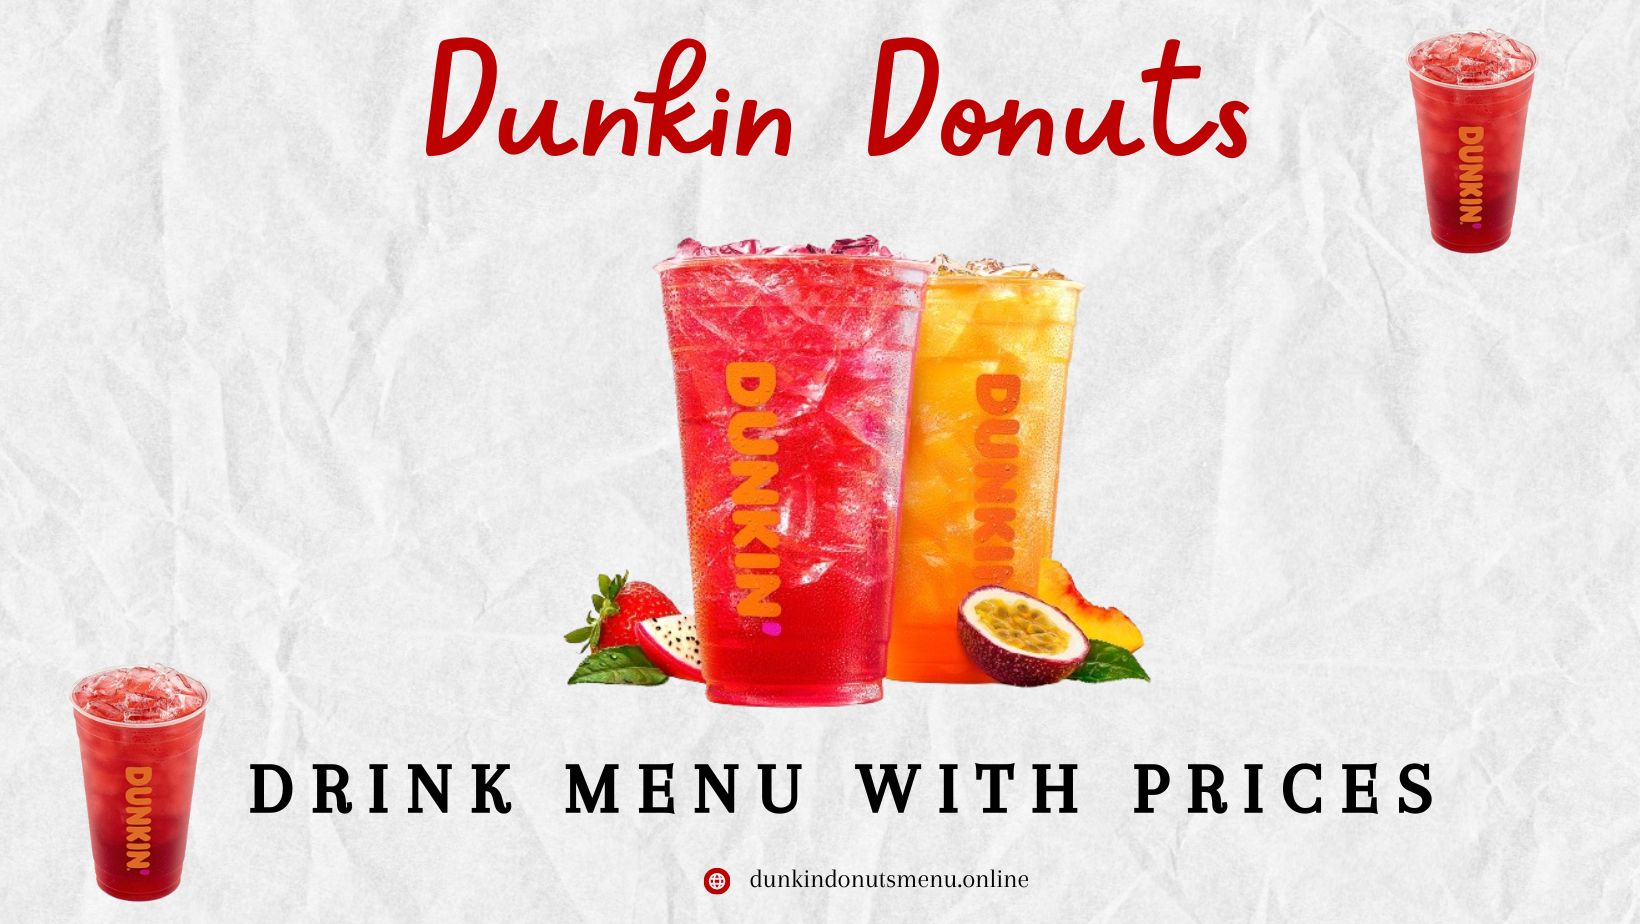 Dunkin Donuts Drink Menu With Prices